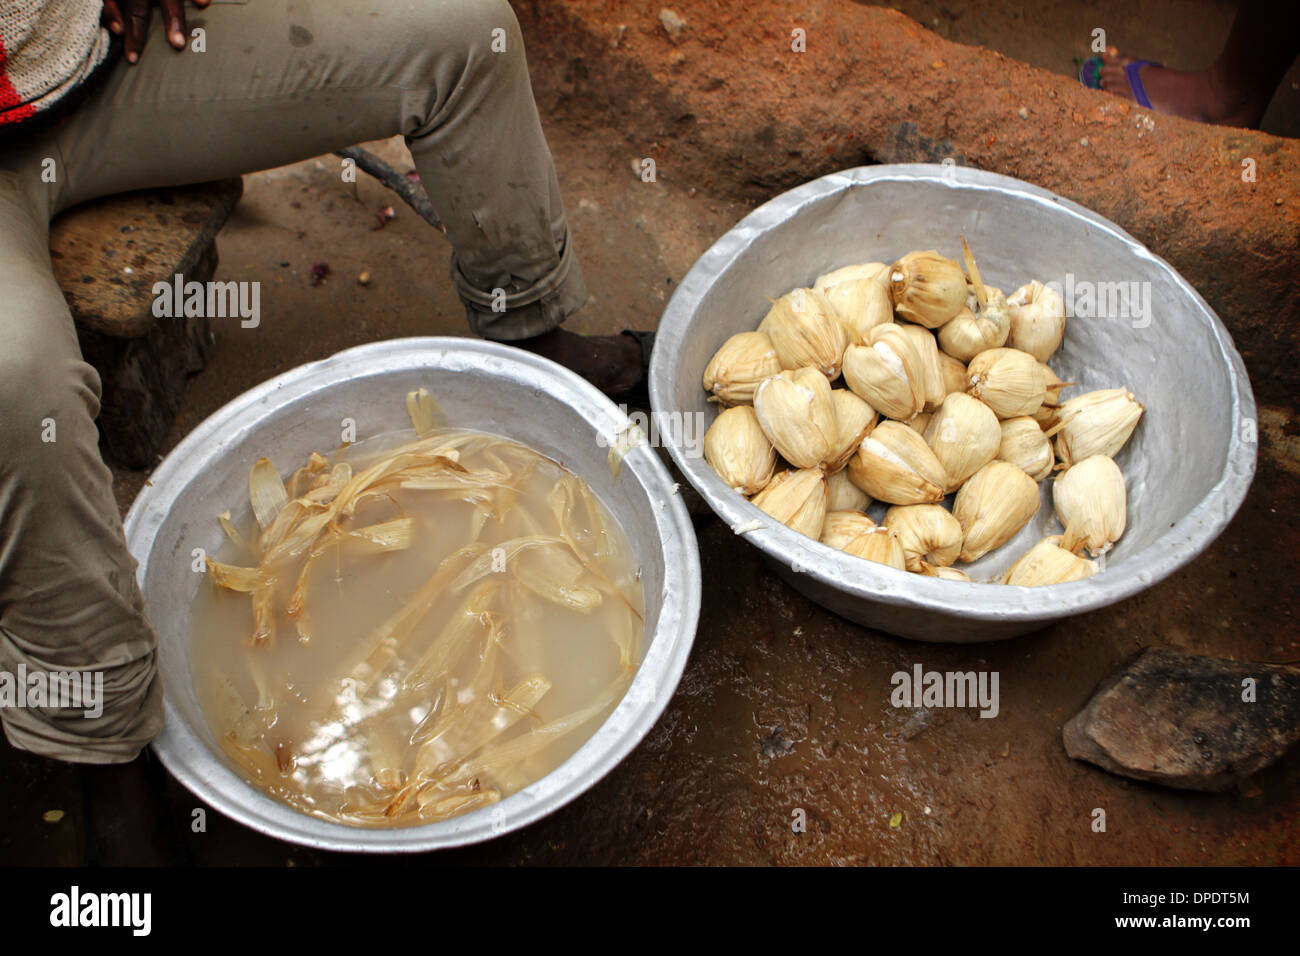 Food being prepared for sale in the market, Accra, Ghana Stock Photo